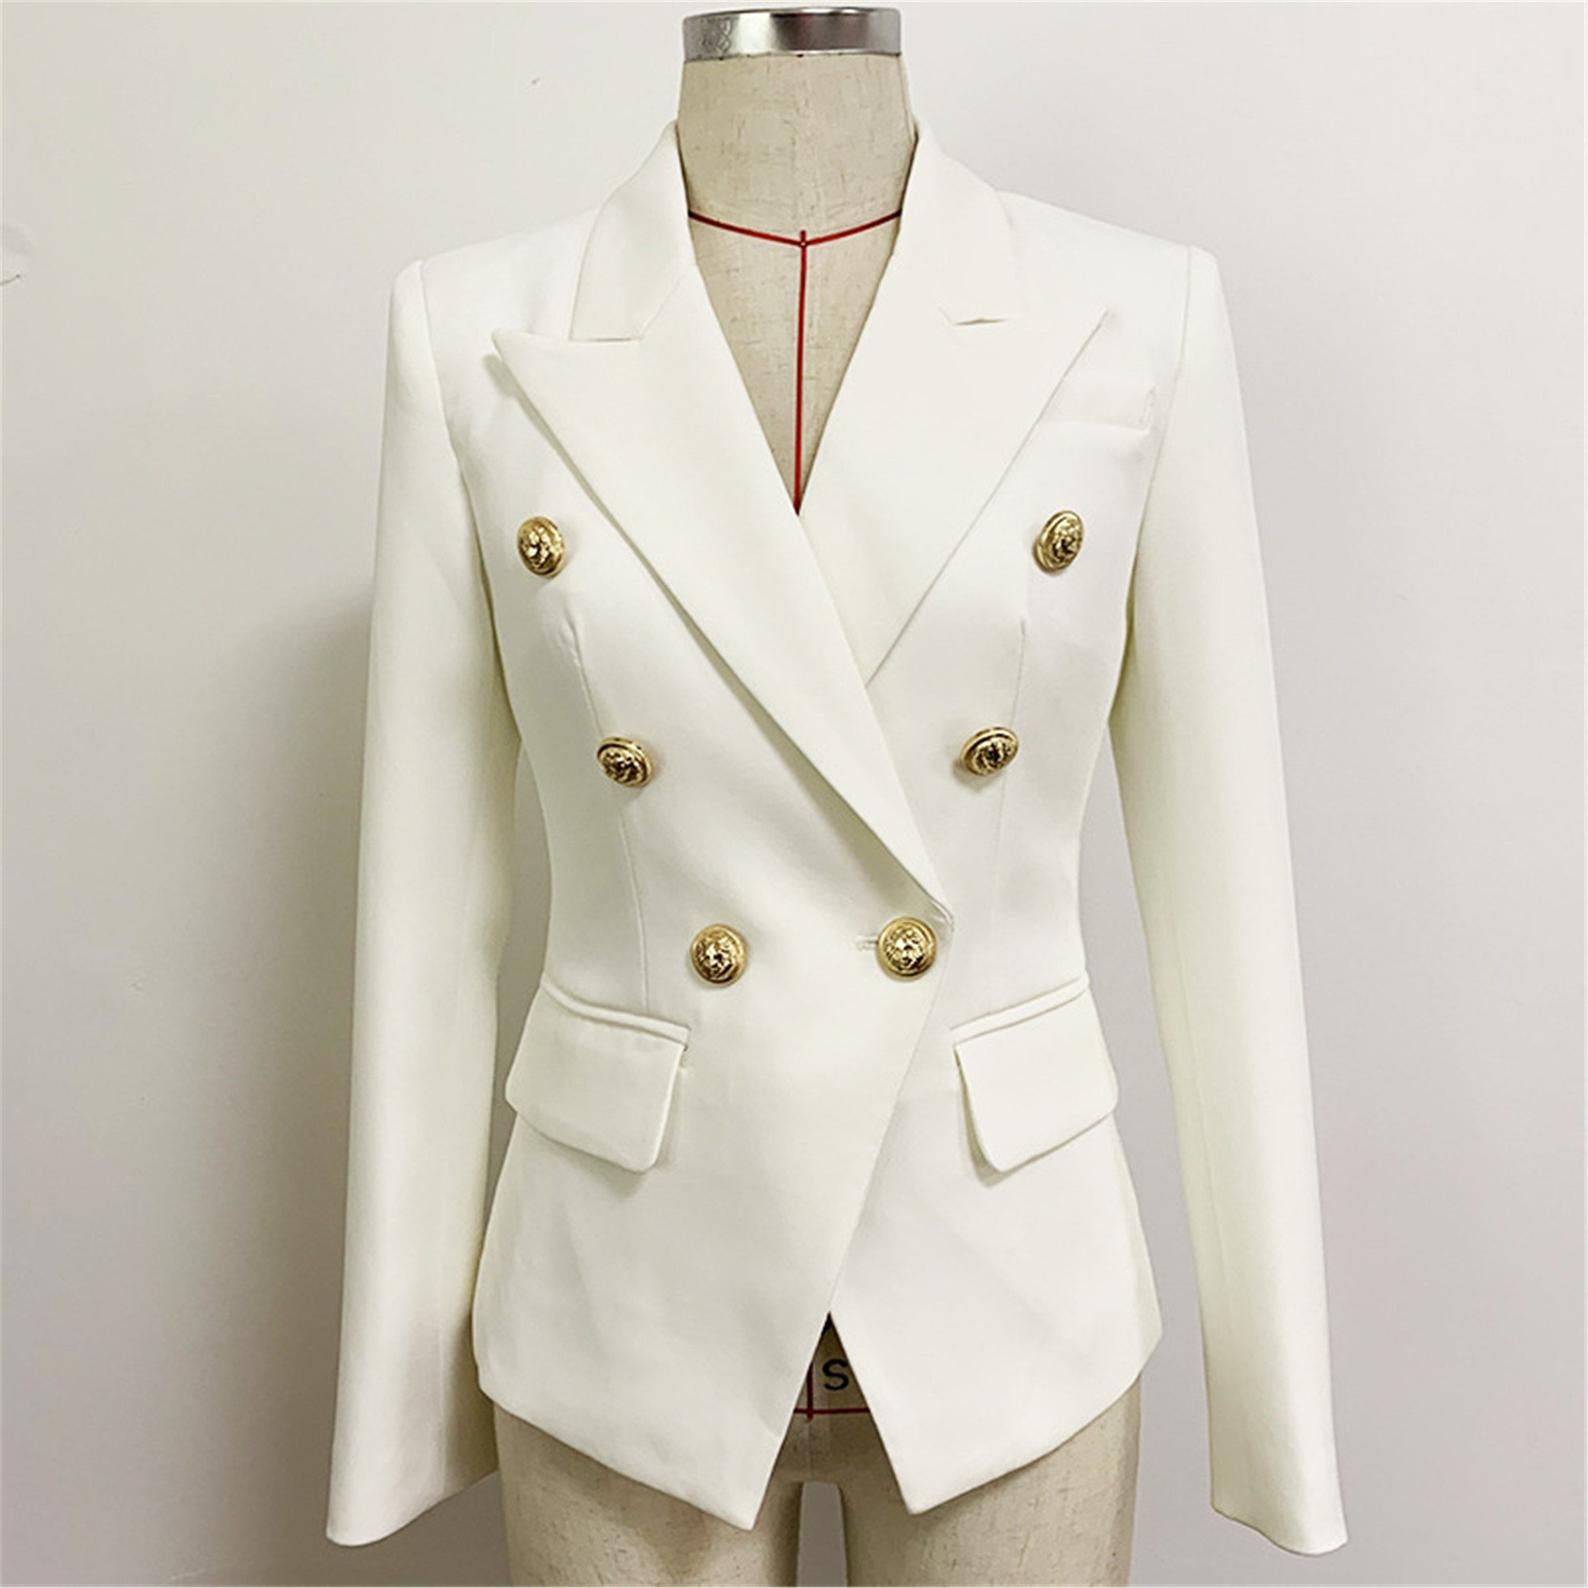 Women's White Fitted Blazer Golden Lion Buttons Coat 2 Colours  UK CUSTOMER SERVICE!  Women's White Fitted Blazer Golden Lion Buttons Coat 2 Colours -This ladies blazer has a beautiful double breasted silhouette. The White Blazer fitted jacket has a golden button frontage with single button closure. 96% Polyester .Fastening: Button. Slim Fit. Long Sleeve.